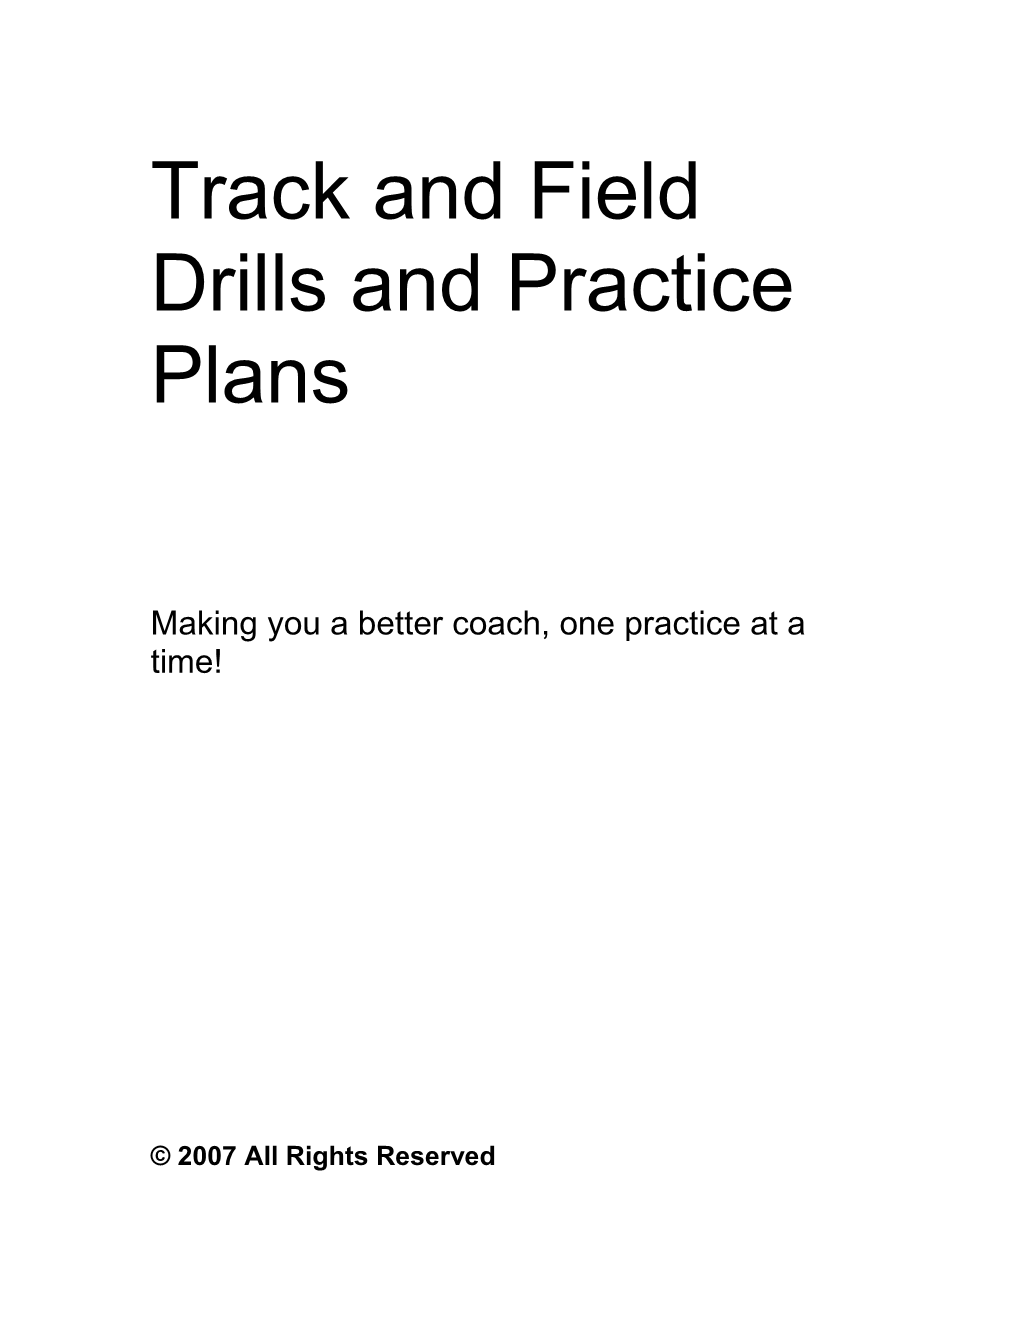 Track And Field Drills And Practice Plans